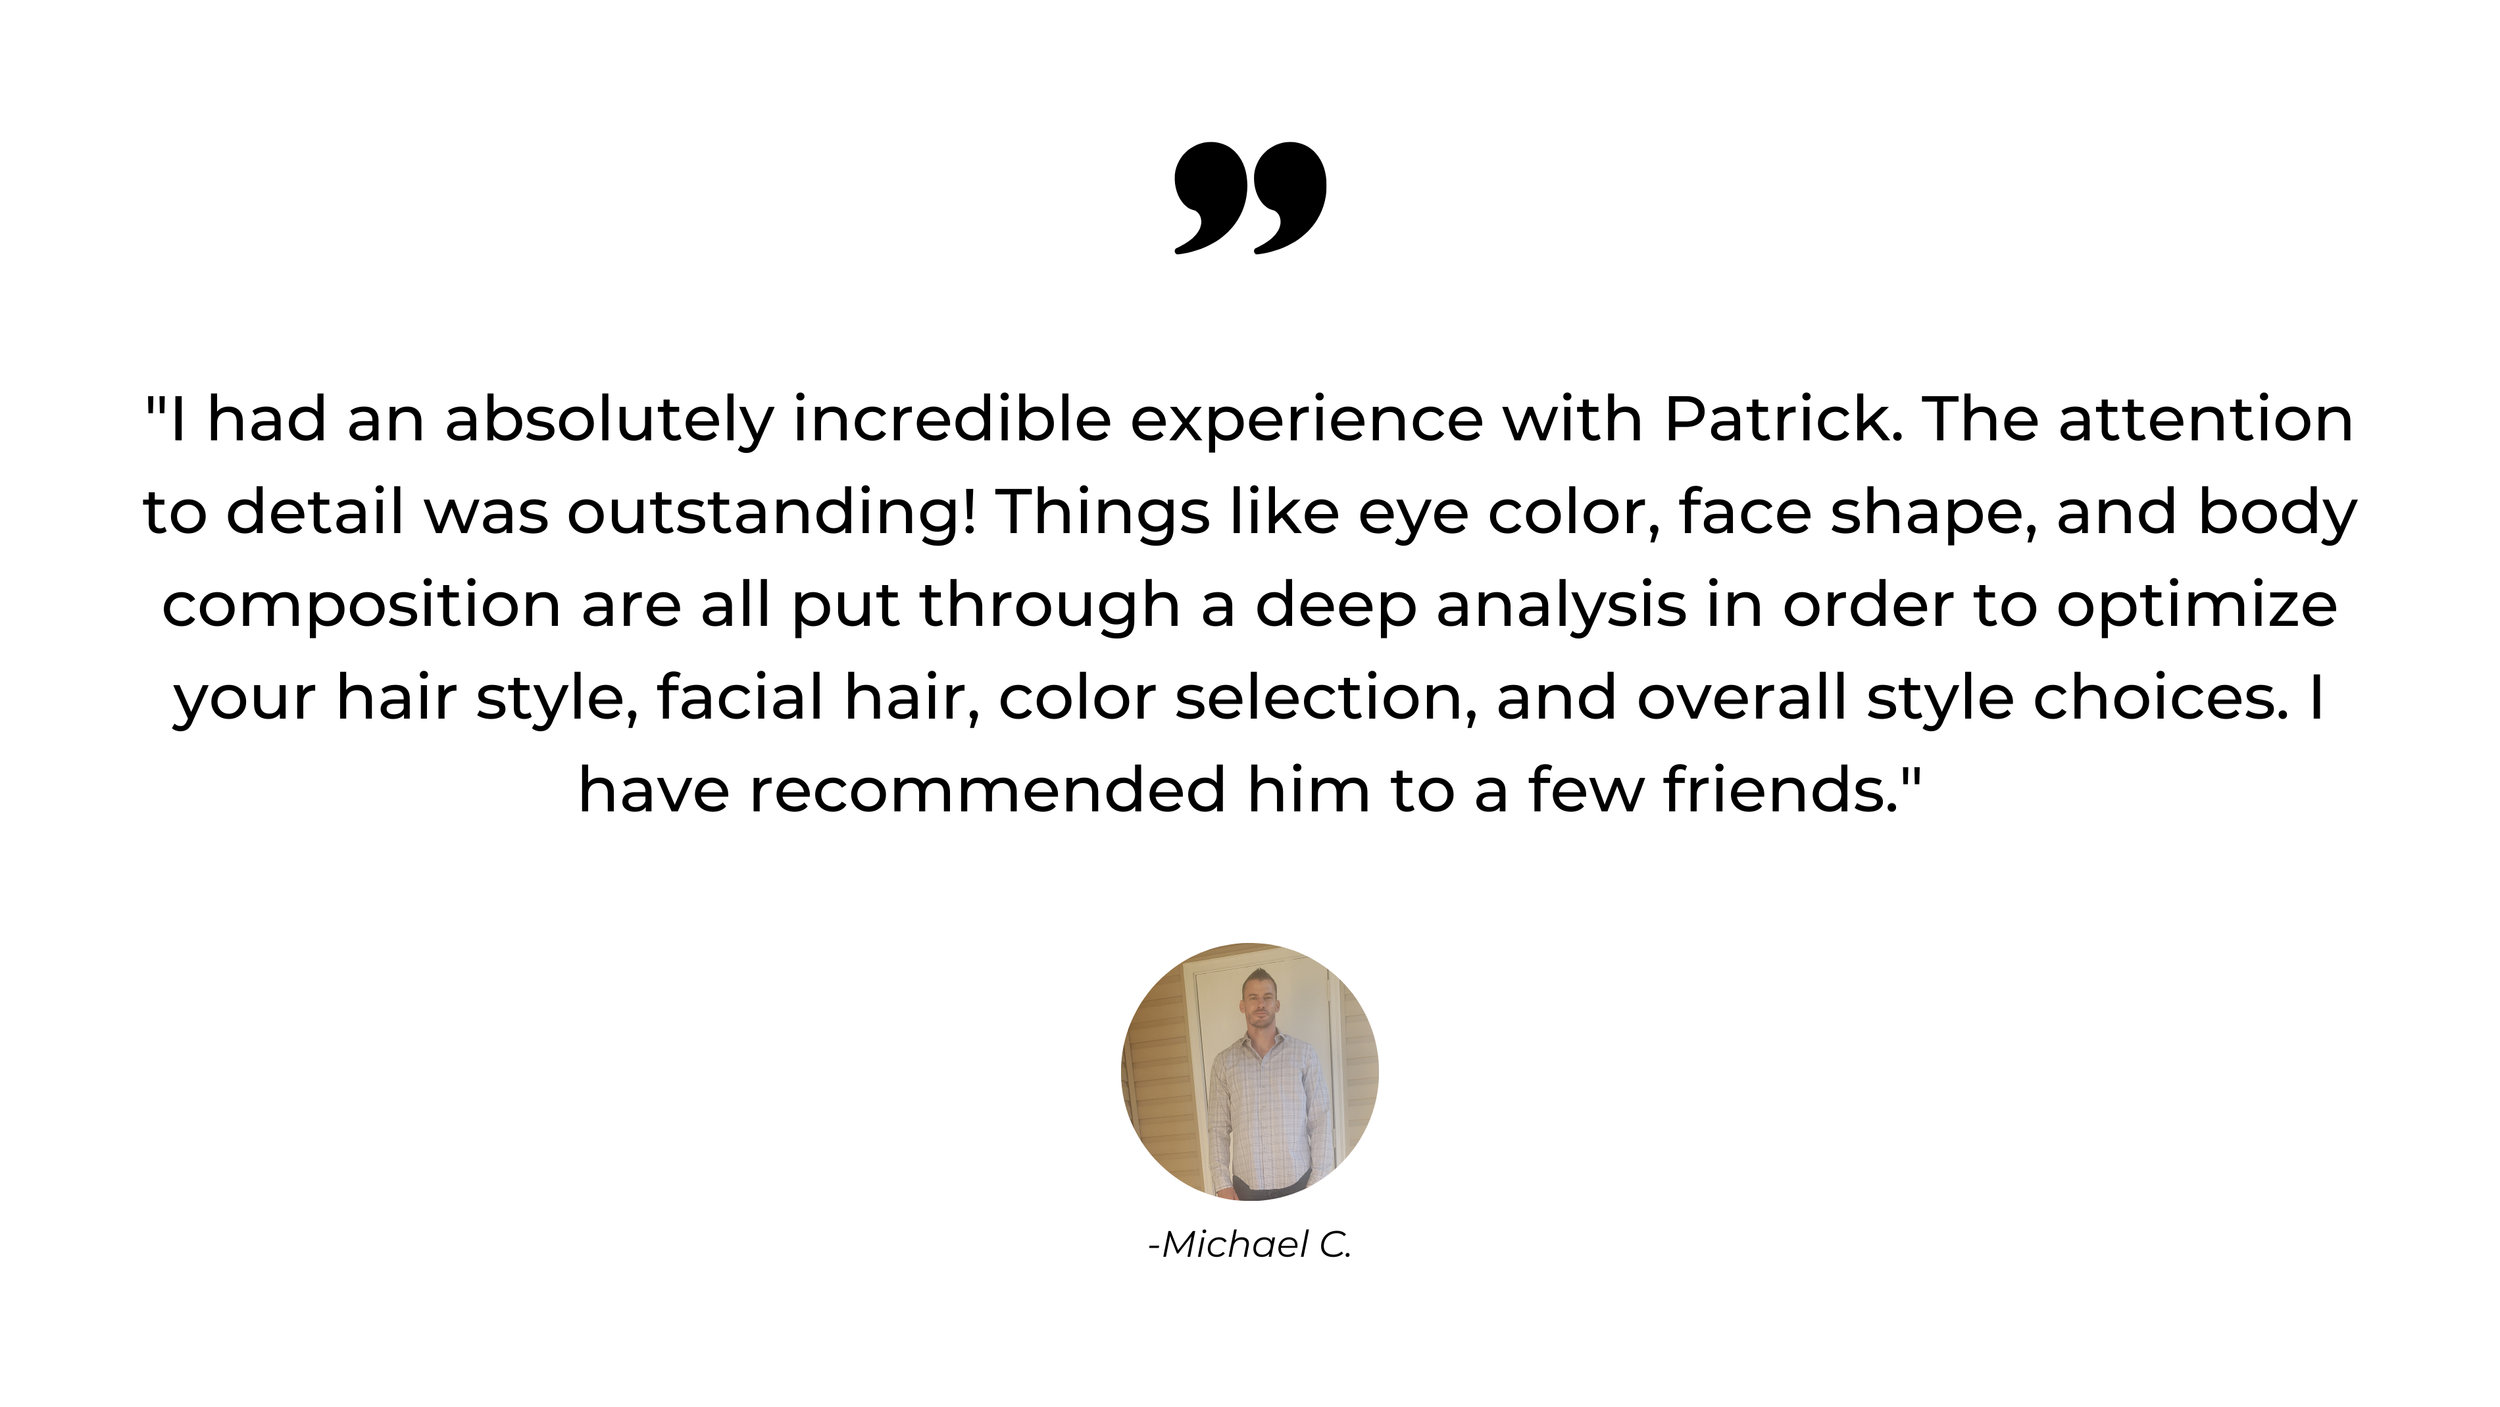 mens-personal-stylist-Pivot-Image-online-review-testimonial- (65).png